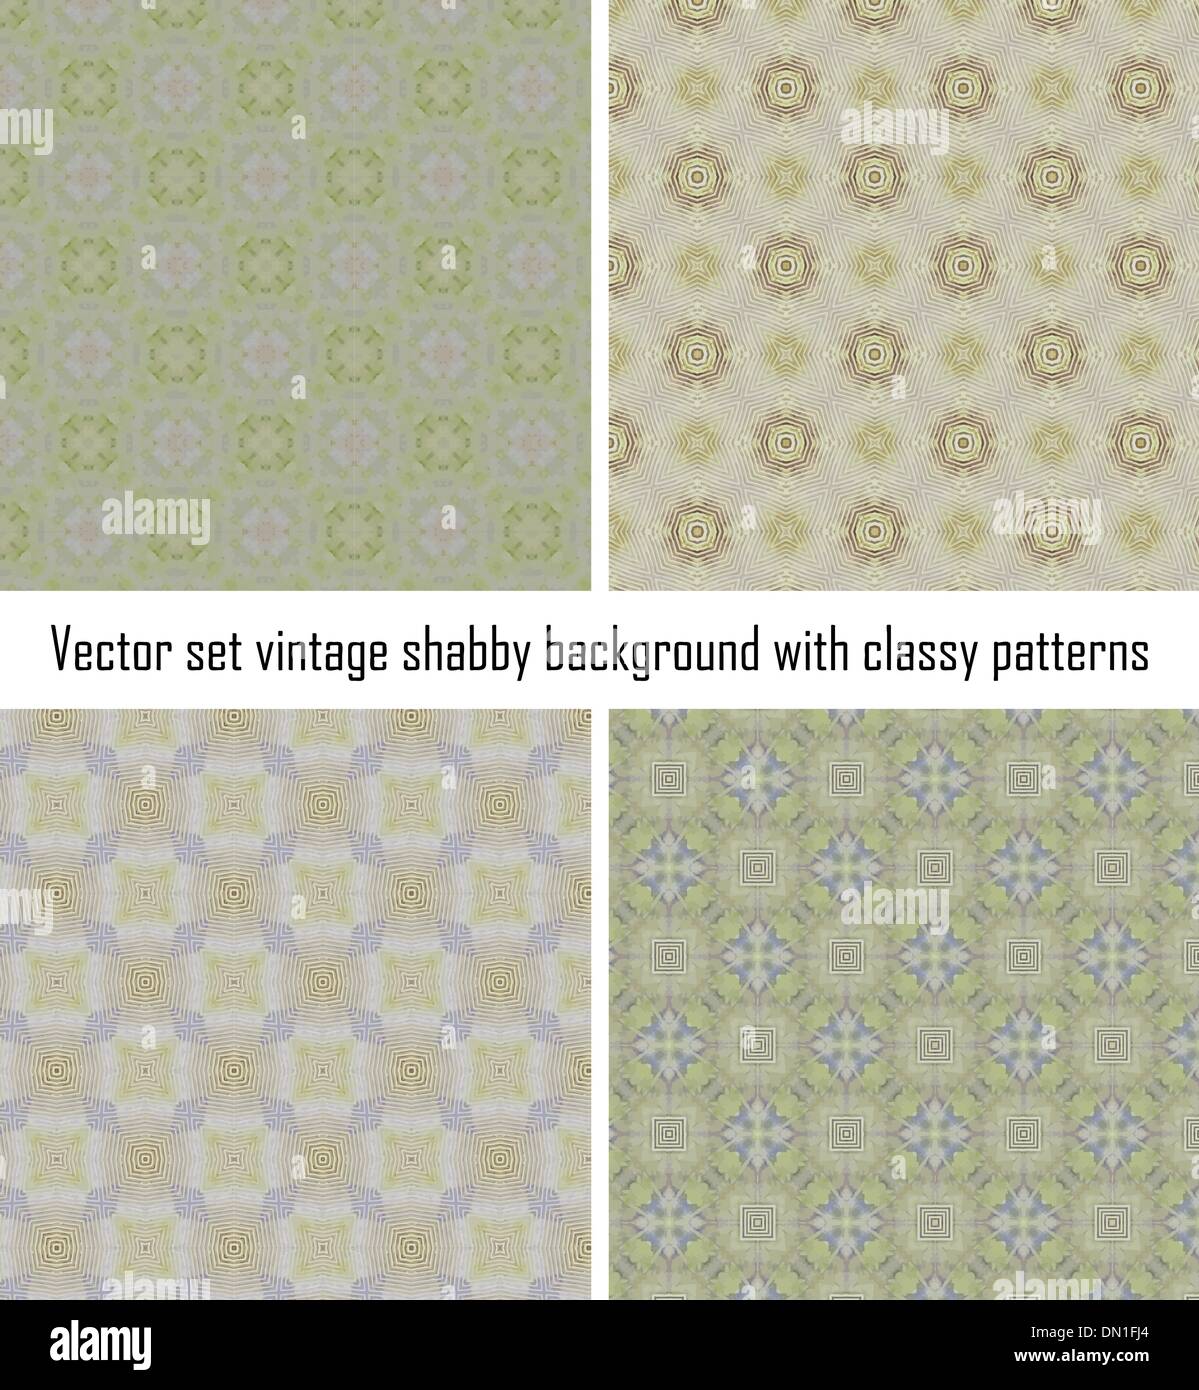 Set vintage shabby background with classy patterns Stock Vector